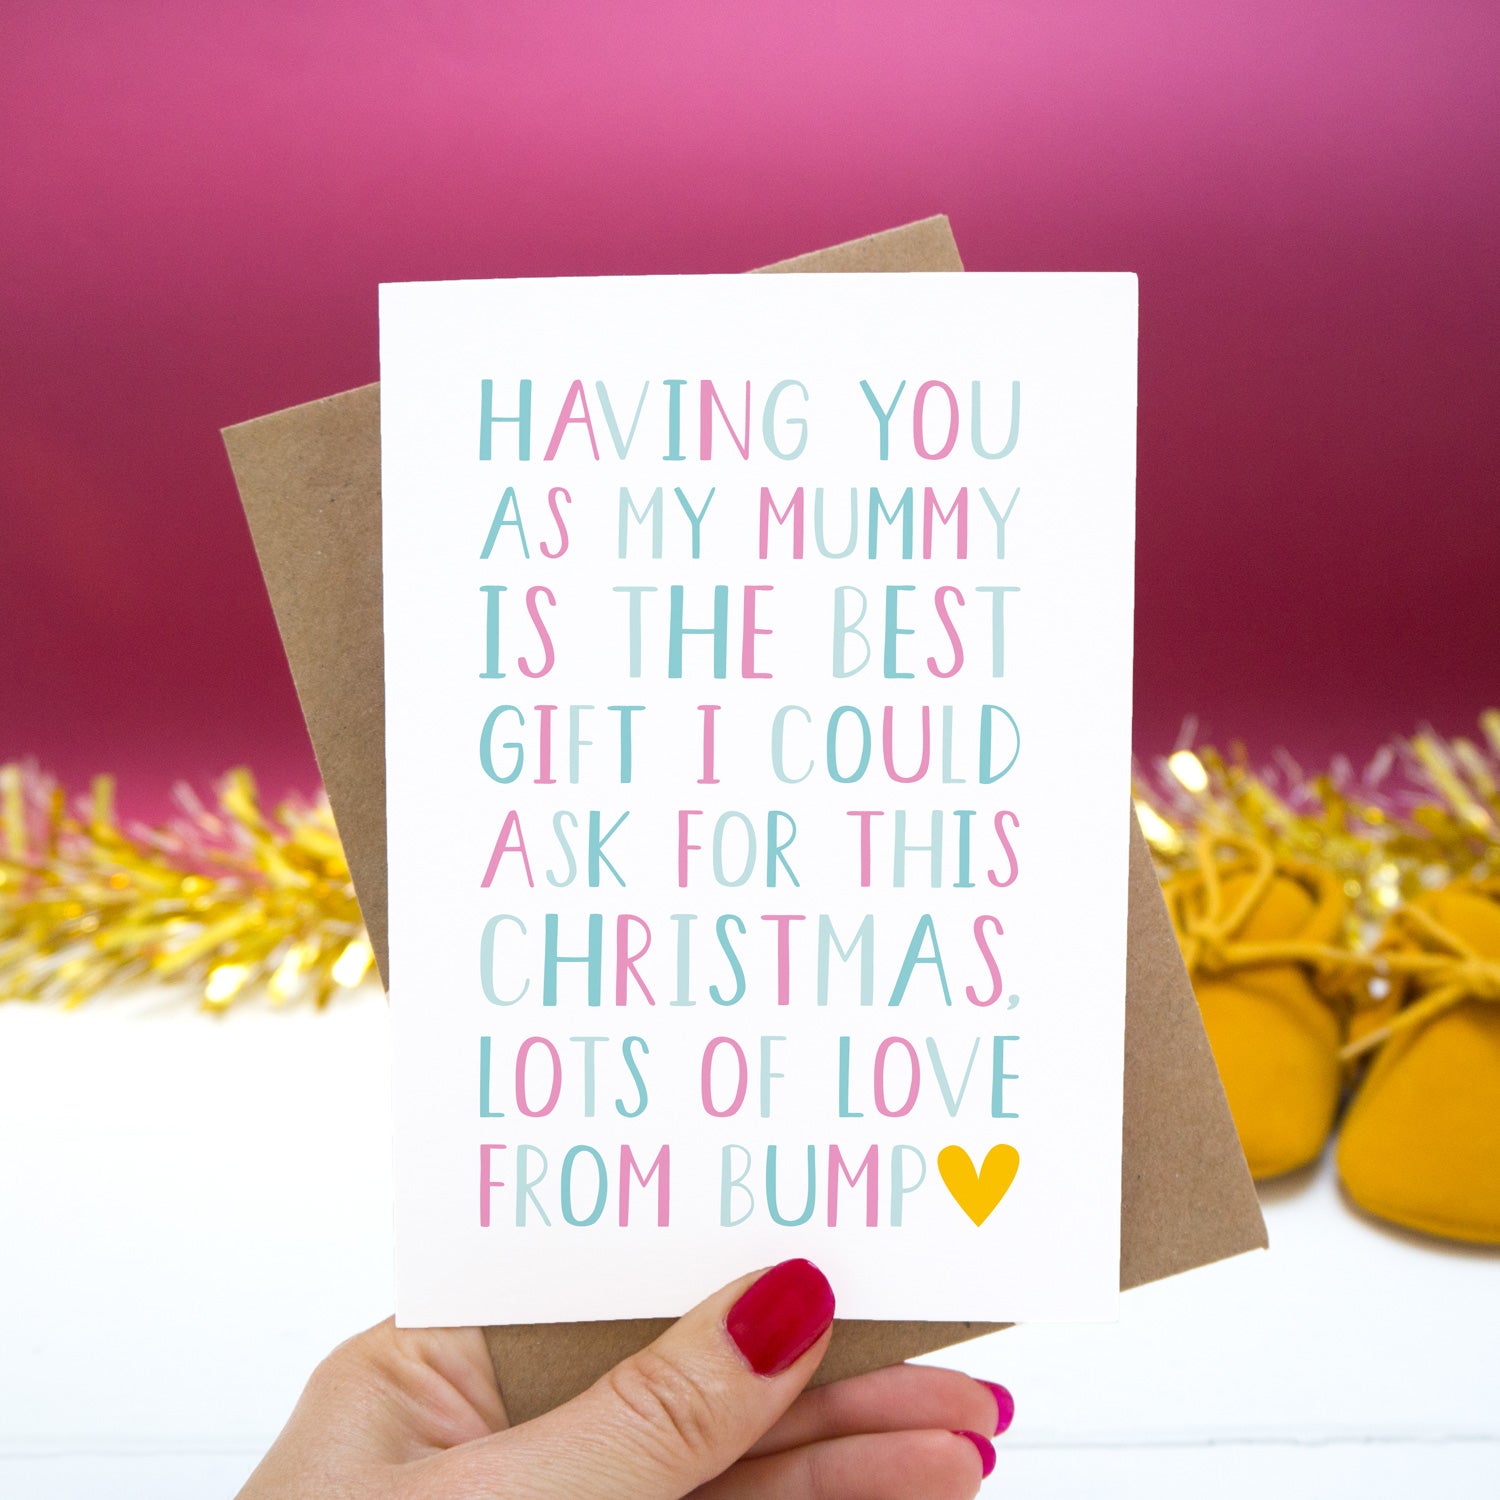 Having you as my Mummy is the best gift I could ask for this Christmas, lots of love from bump." - Christmas bump card with pink and blue text set on a red background with gold tinsel and mustard shoes.